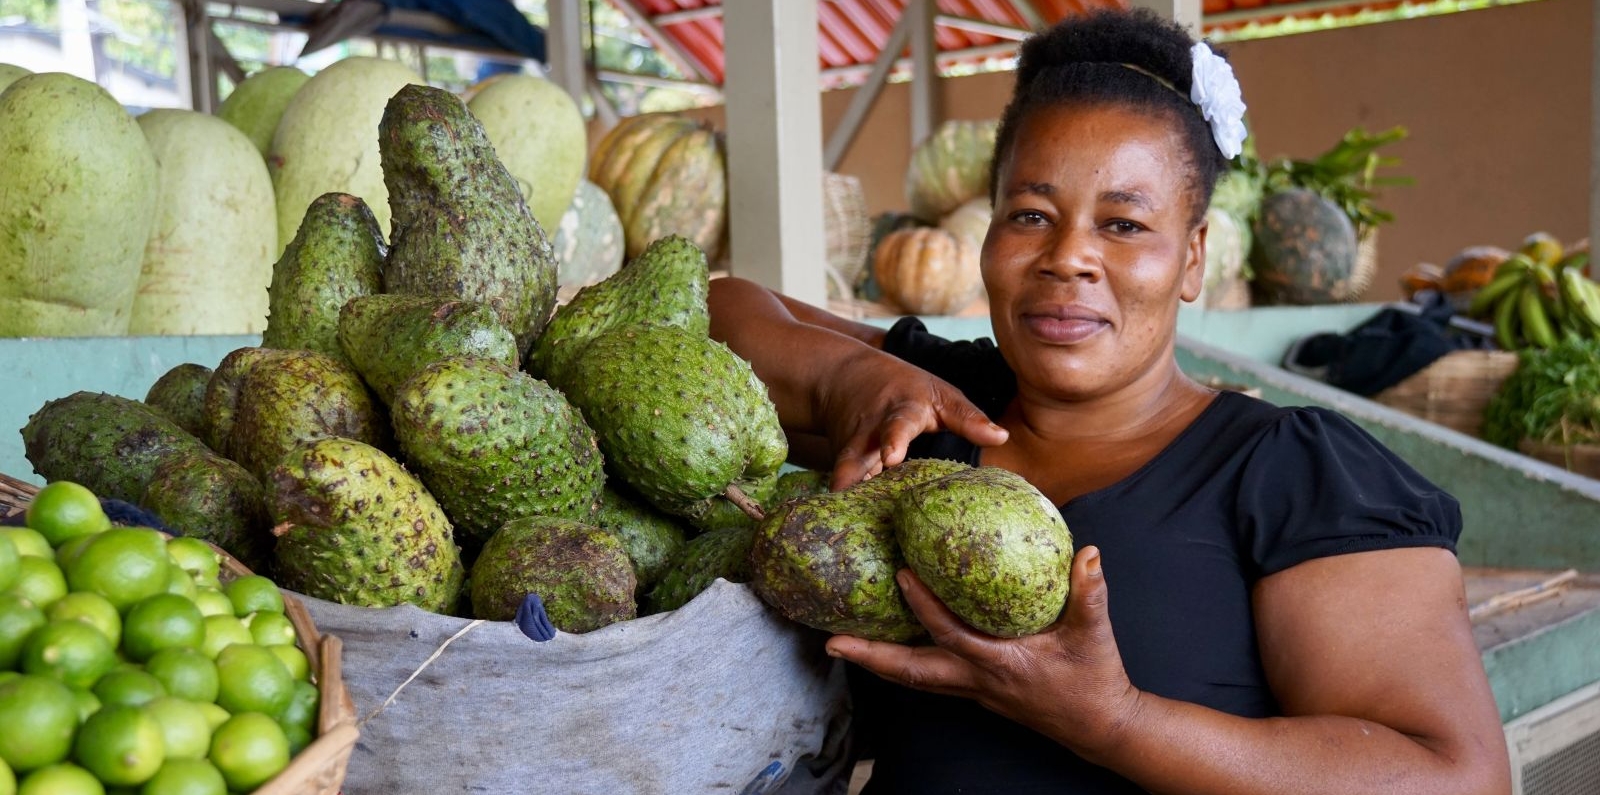 Haitian woman selling fruit at a market